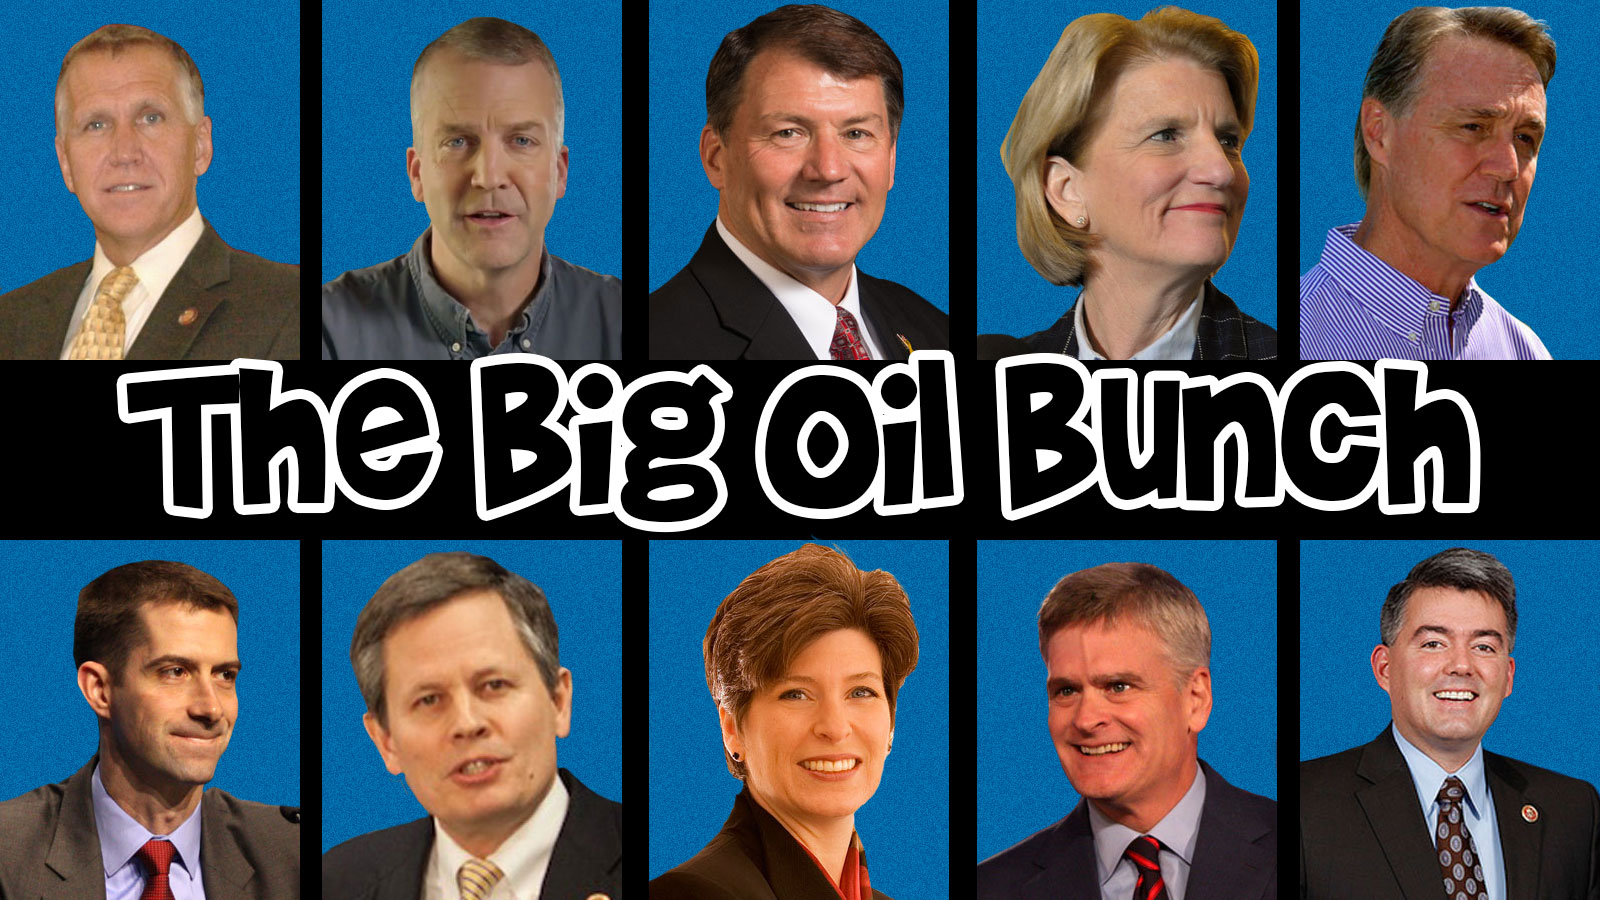 The Big Oil Bunch